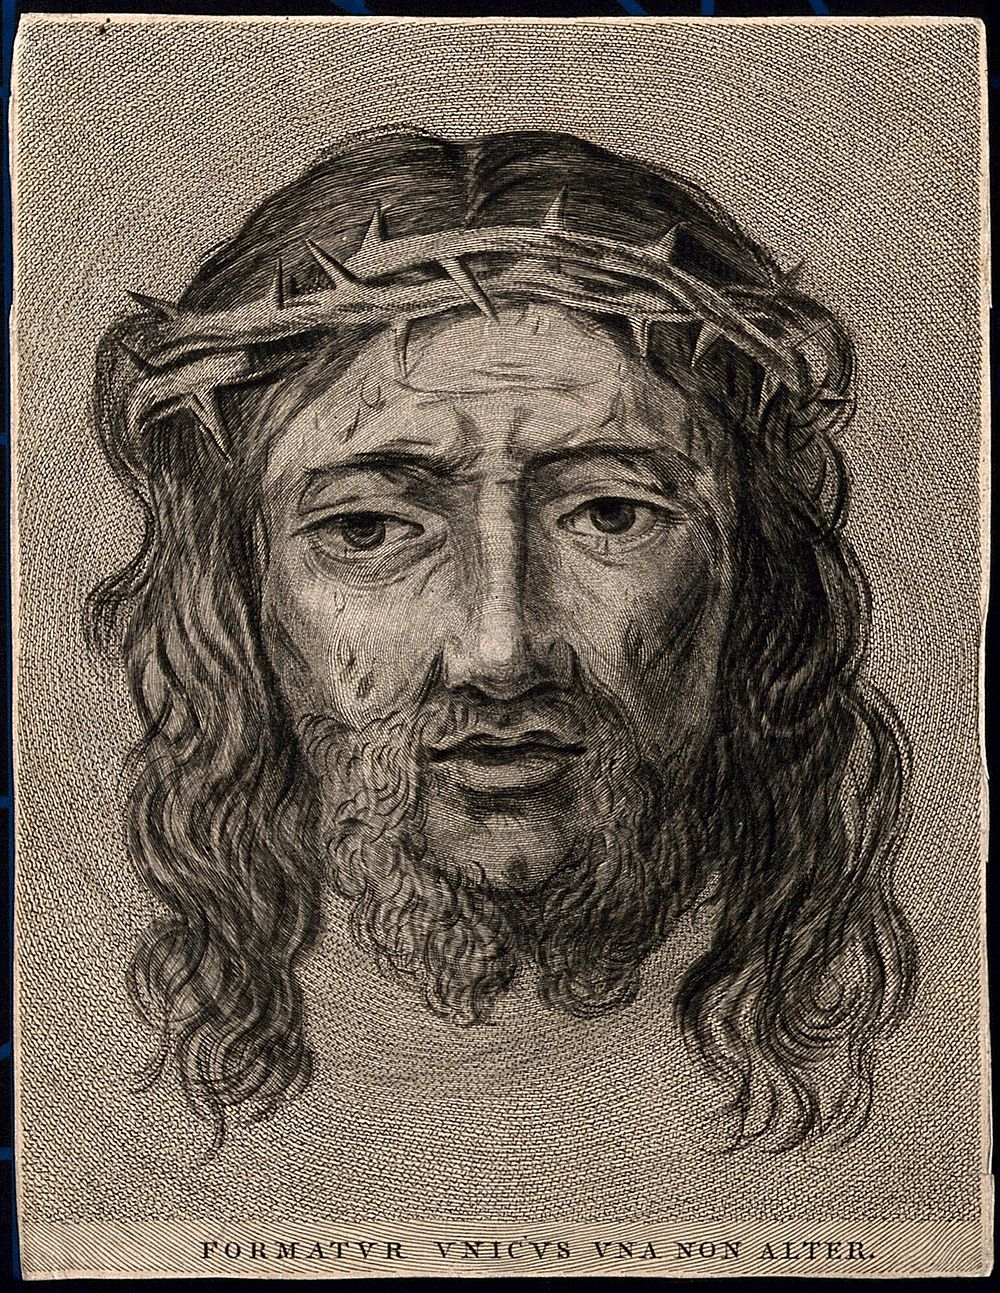 The veronica (sudarium of Saint Veronica), representing the face of Christ. Etching after C. Mellan.